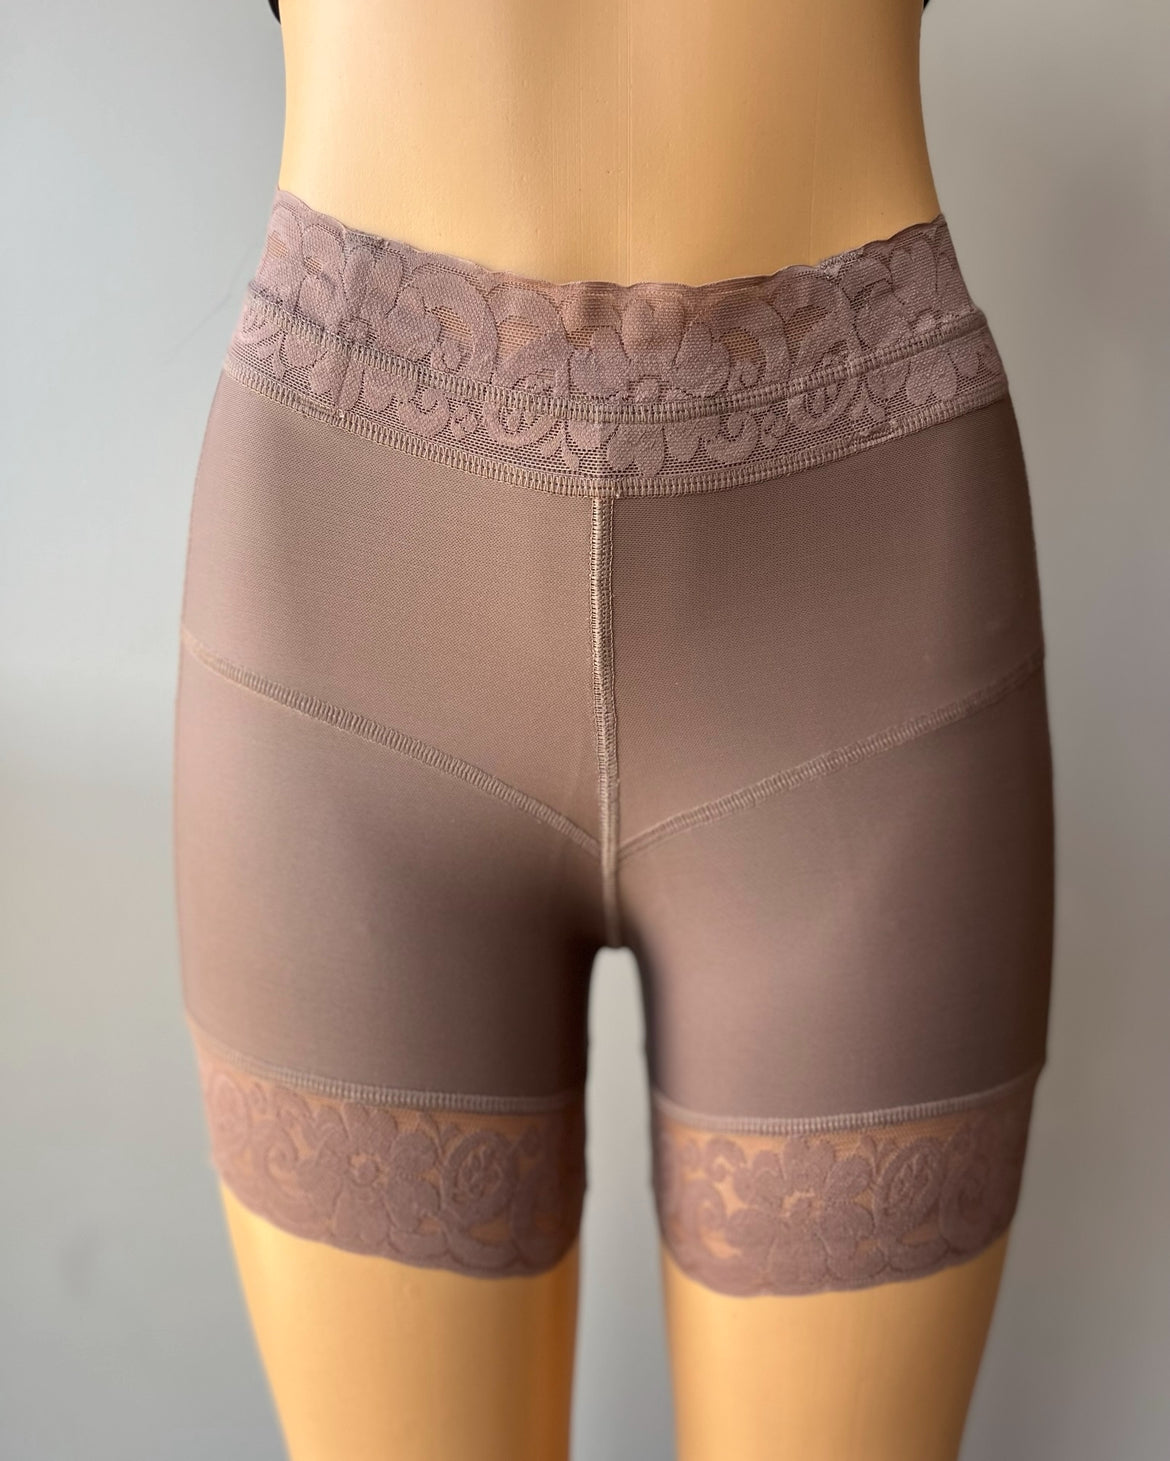 LUCIA Lace Higher compression shorts booty lift